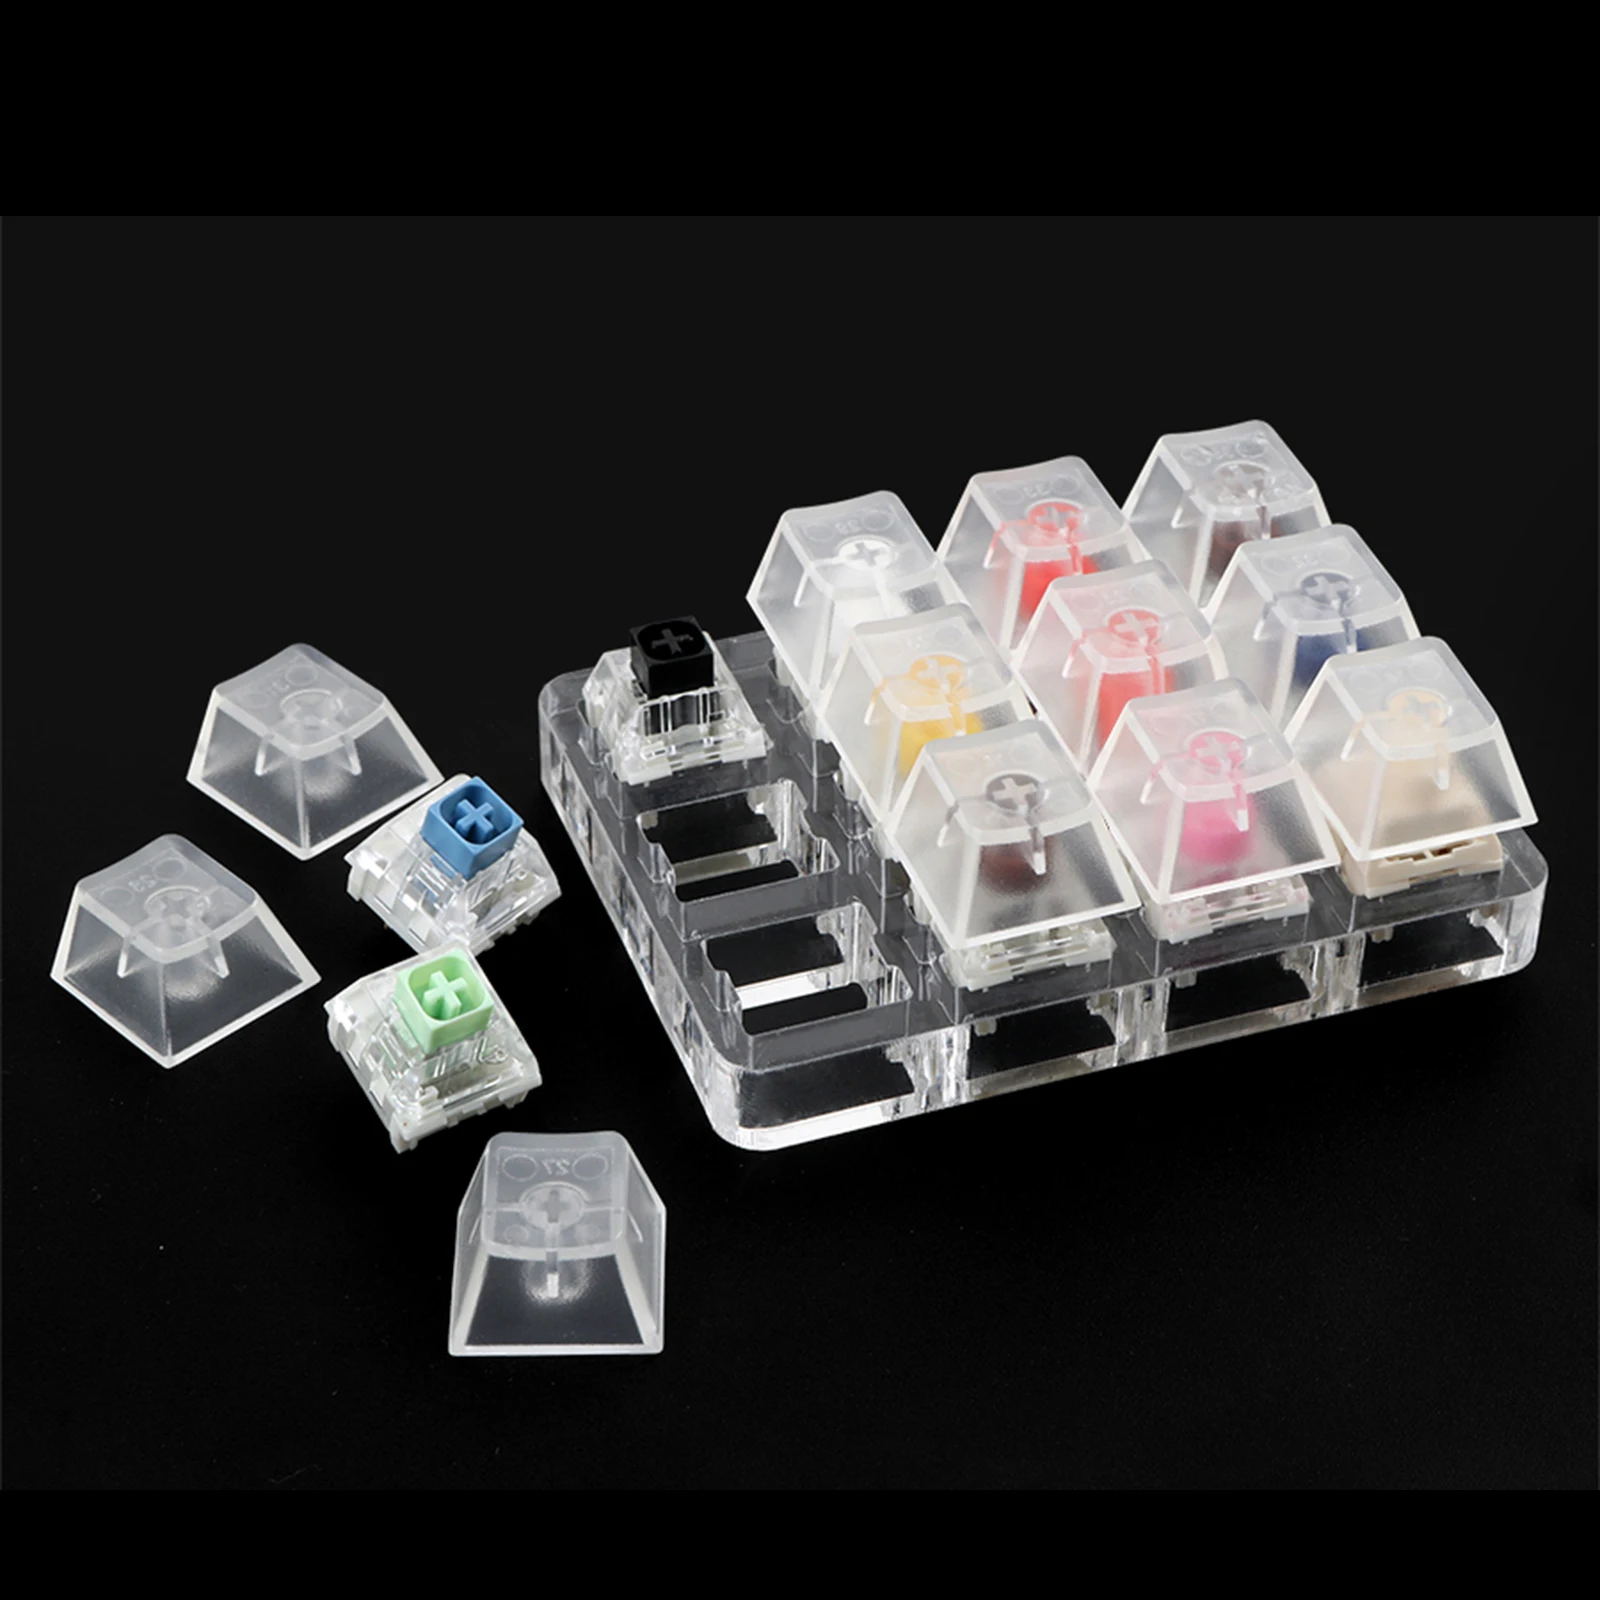 12 Keys Switches Tester for Kailh Box DIY, Professional Accessories